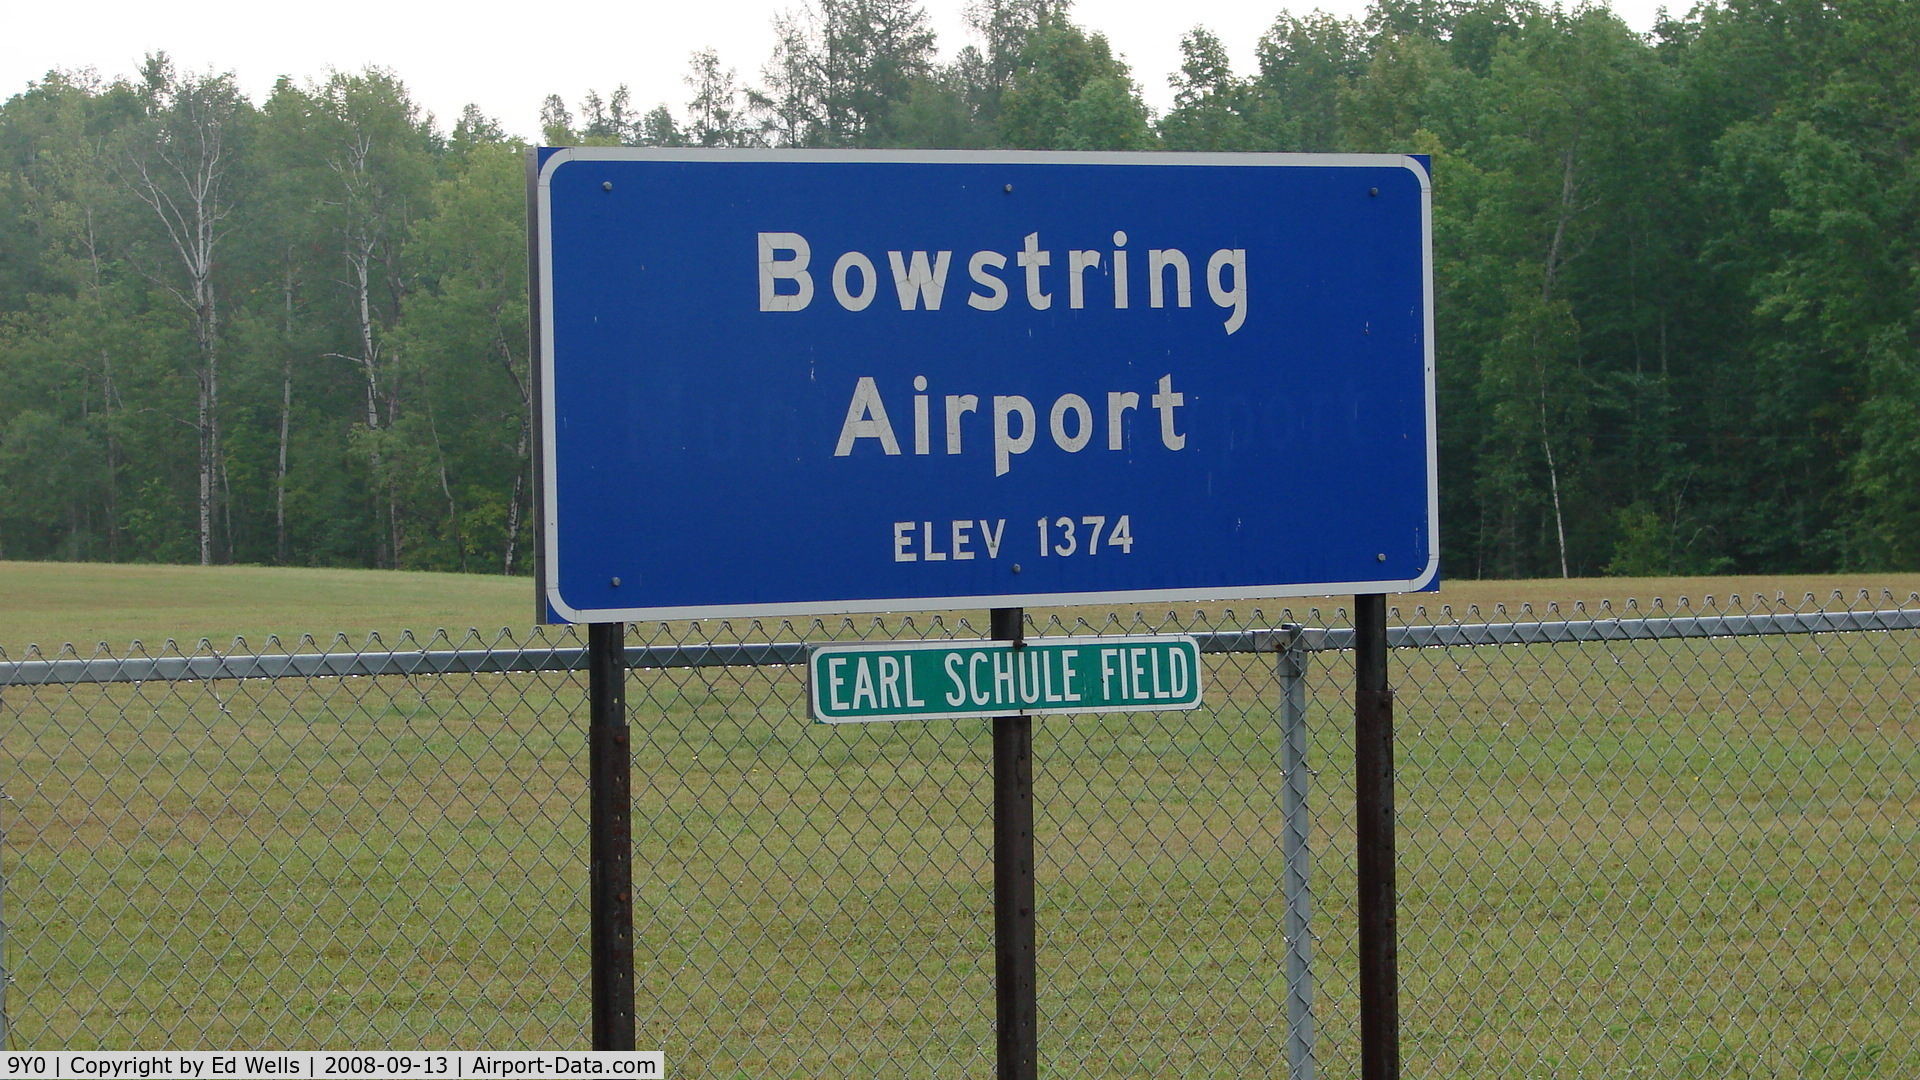 Bowstring Airport (9Y0) - Bowstring Airport